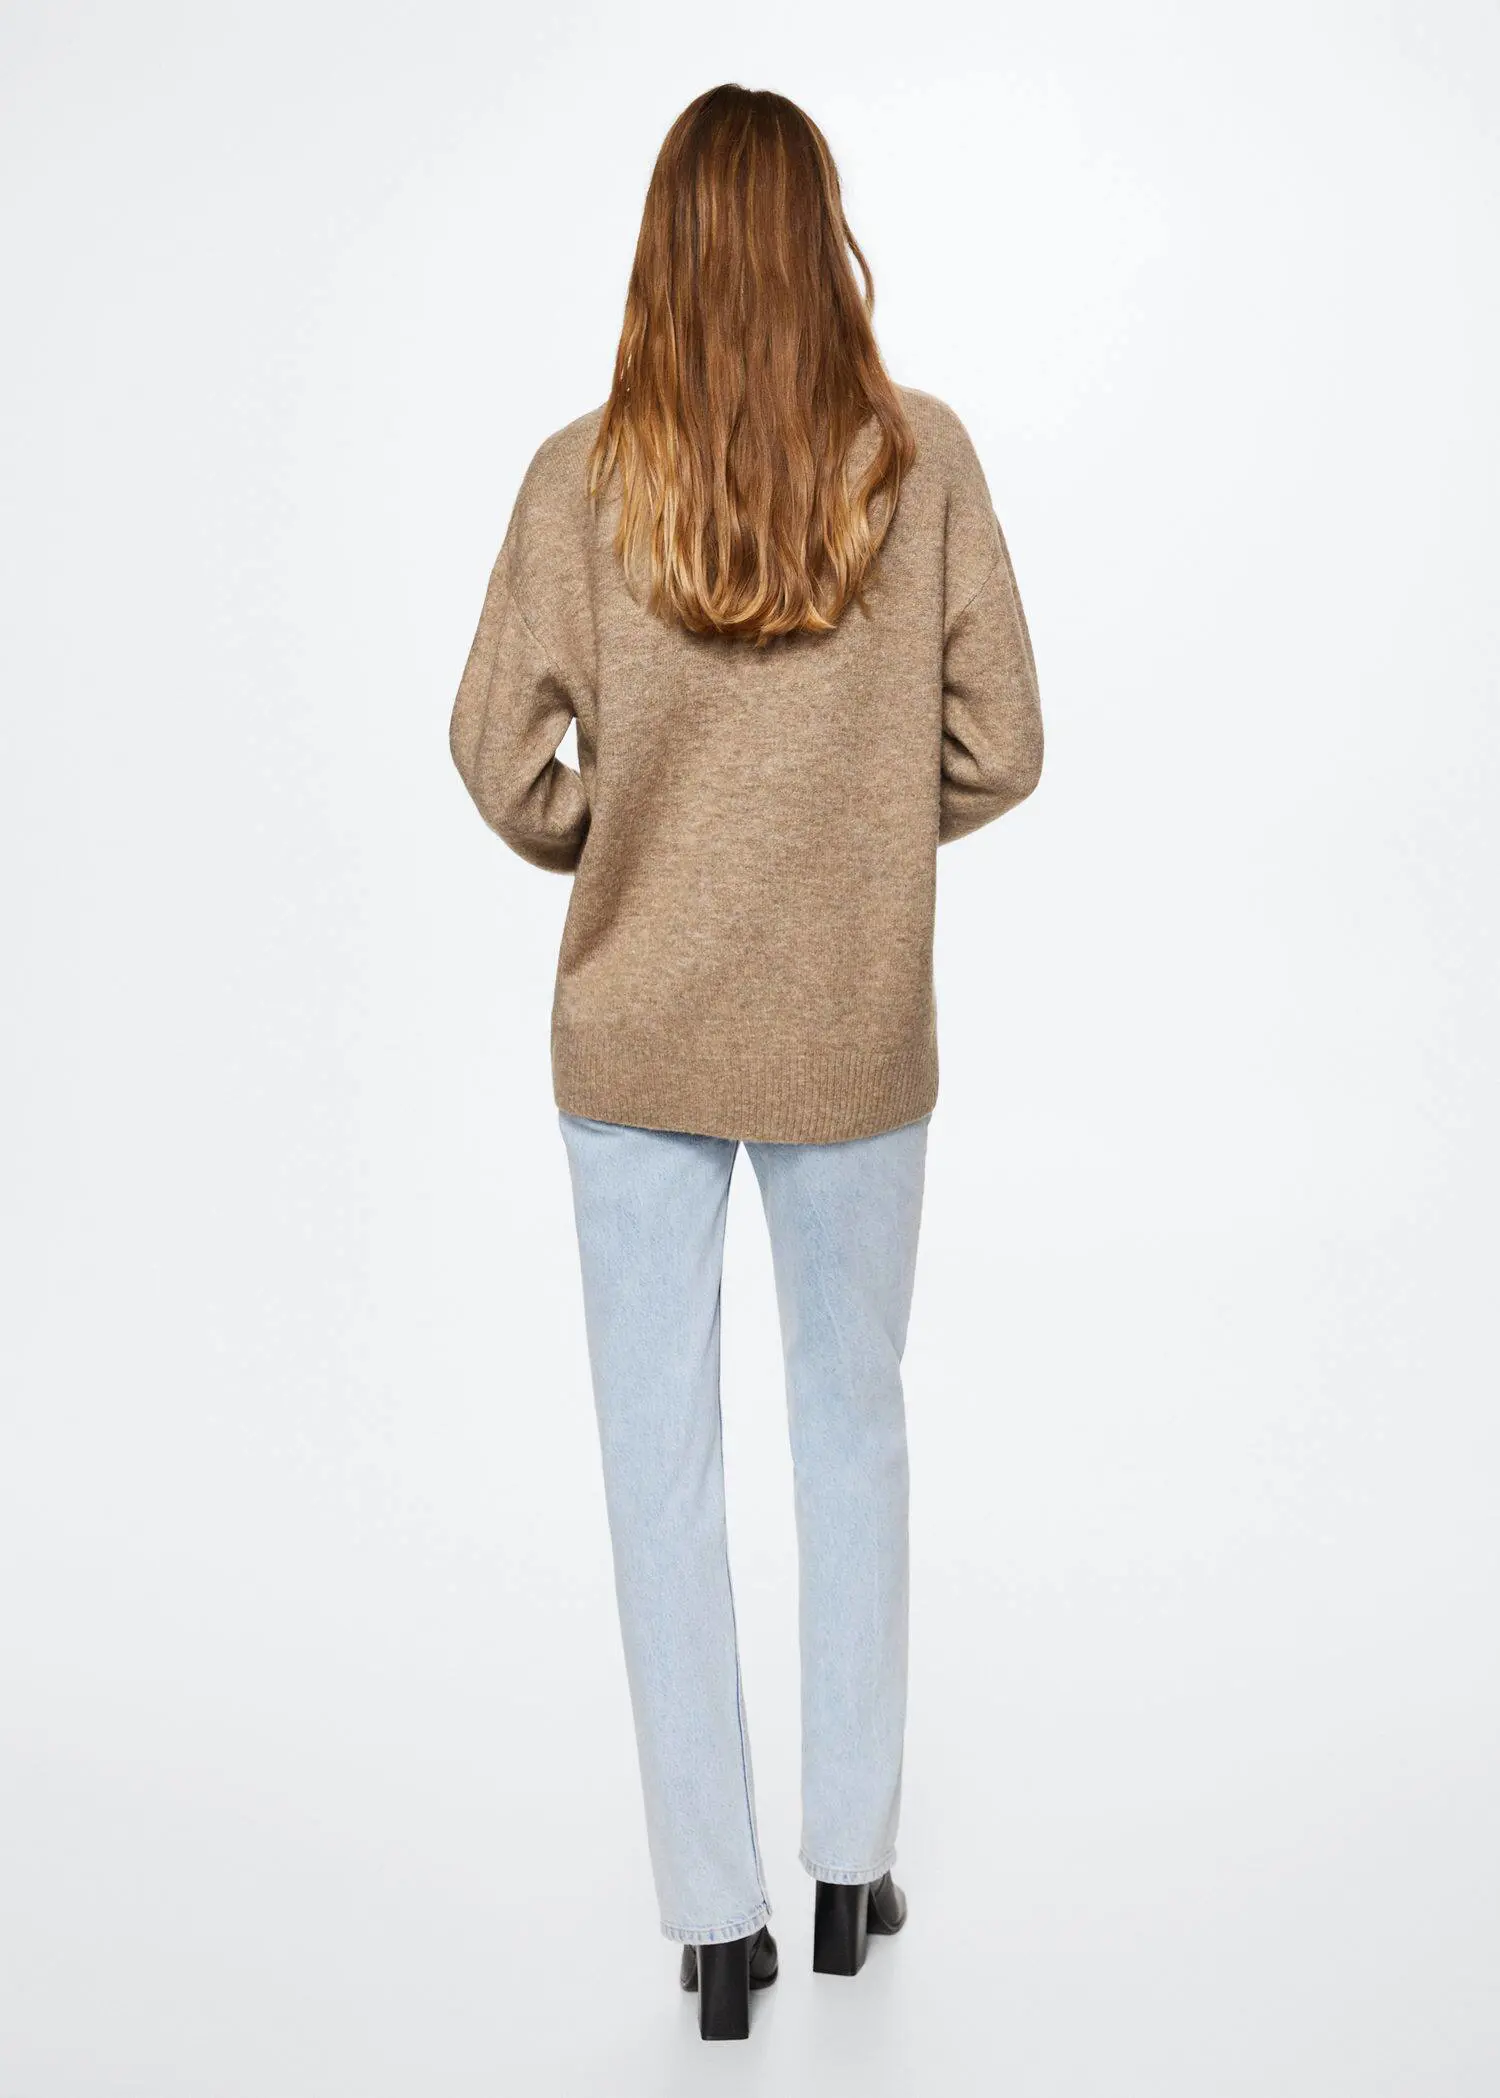 Mango V-neck sweater. a woman standing in front of a white wall. 